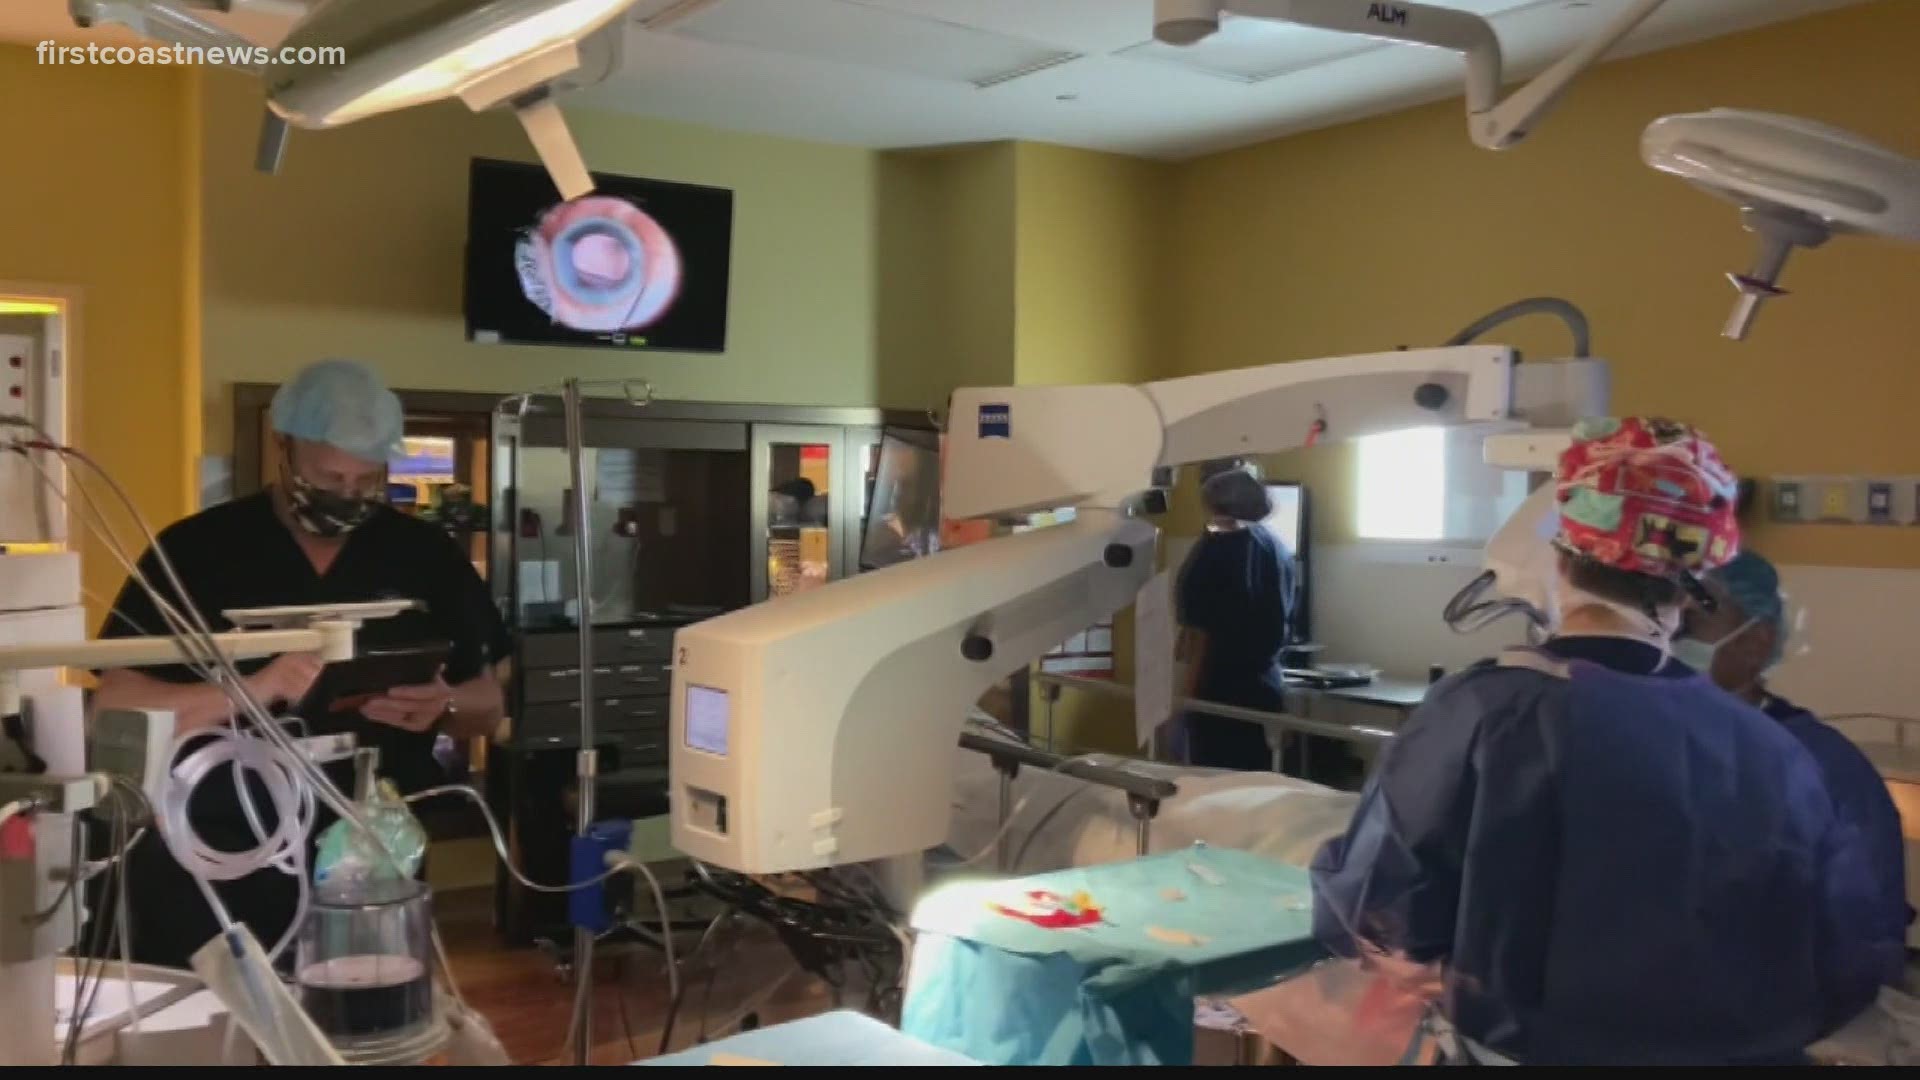 Jacksonville non-profit, eye center gives 20 free cataract surgeries to those in need